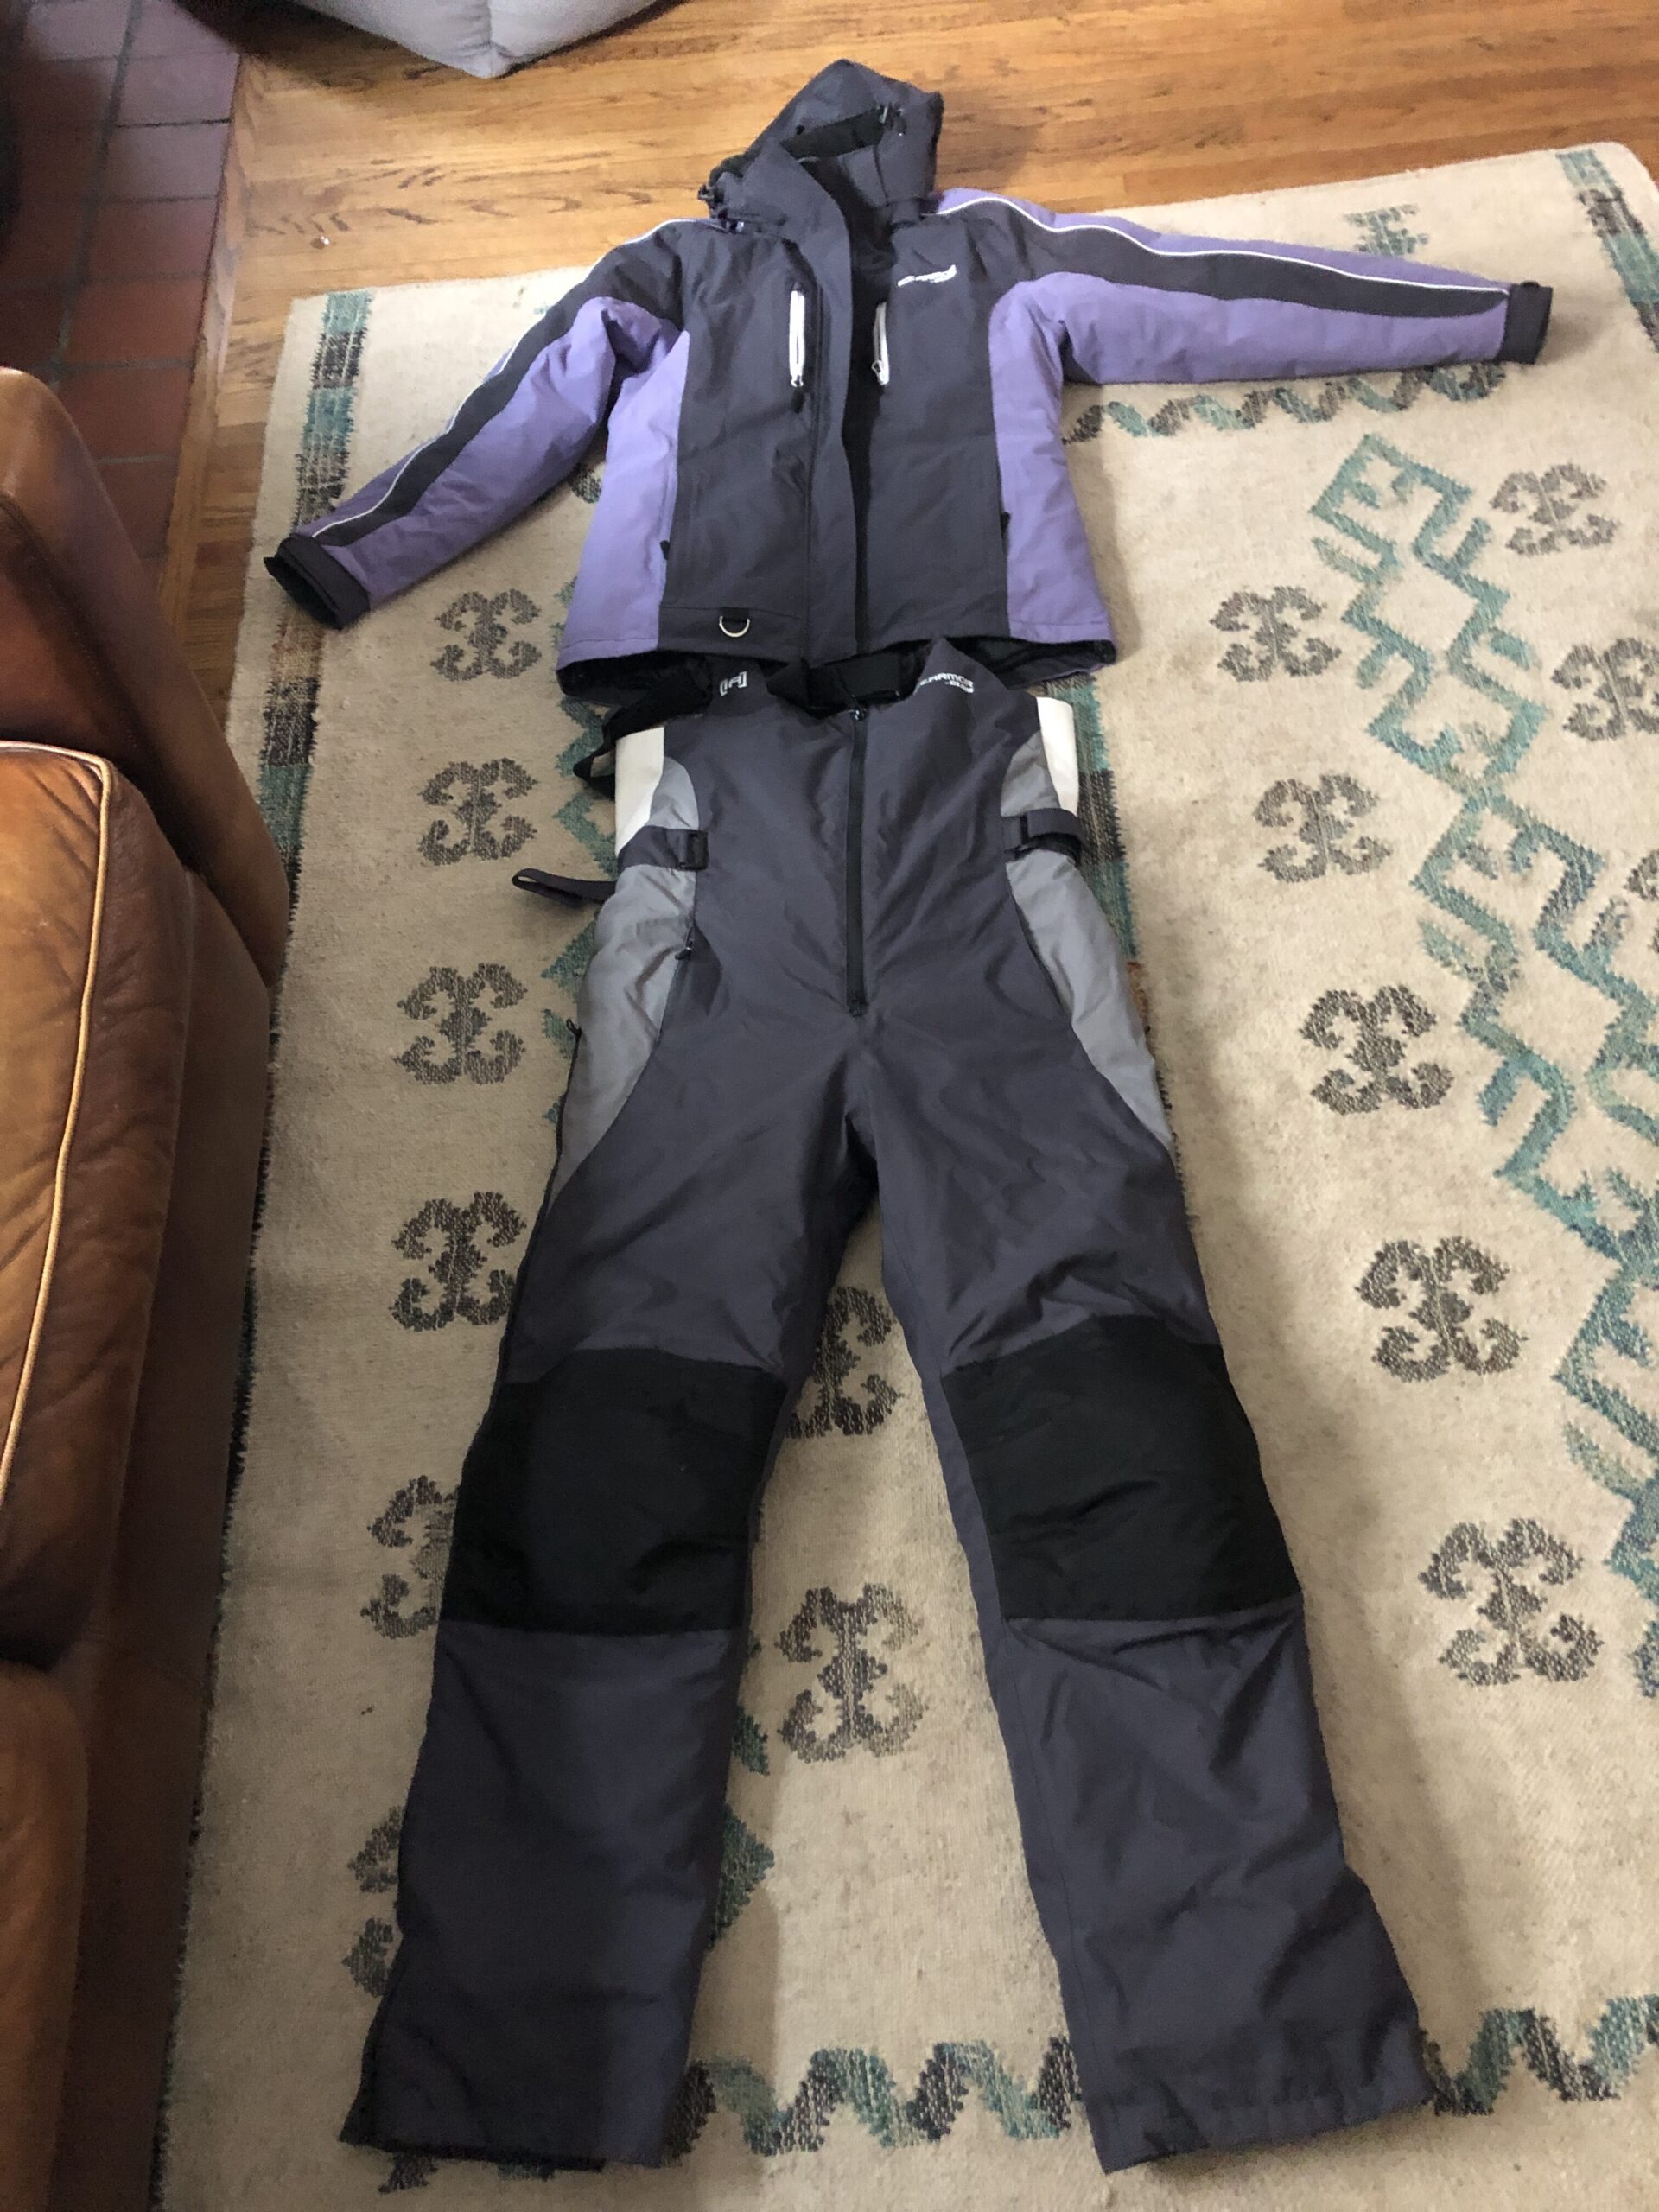 Women’s Ice Armor Jacket and Bibs - Classified Ads - Classified Ads ...